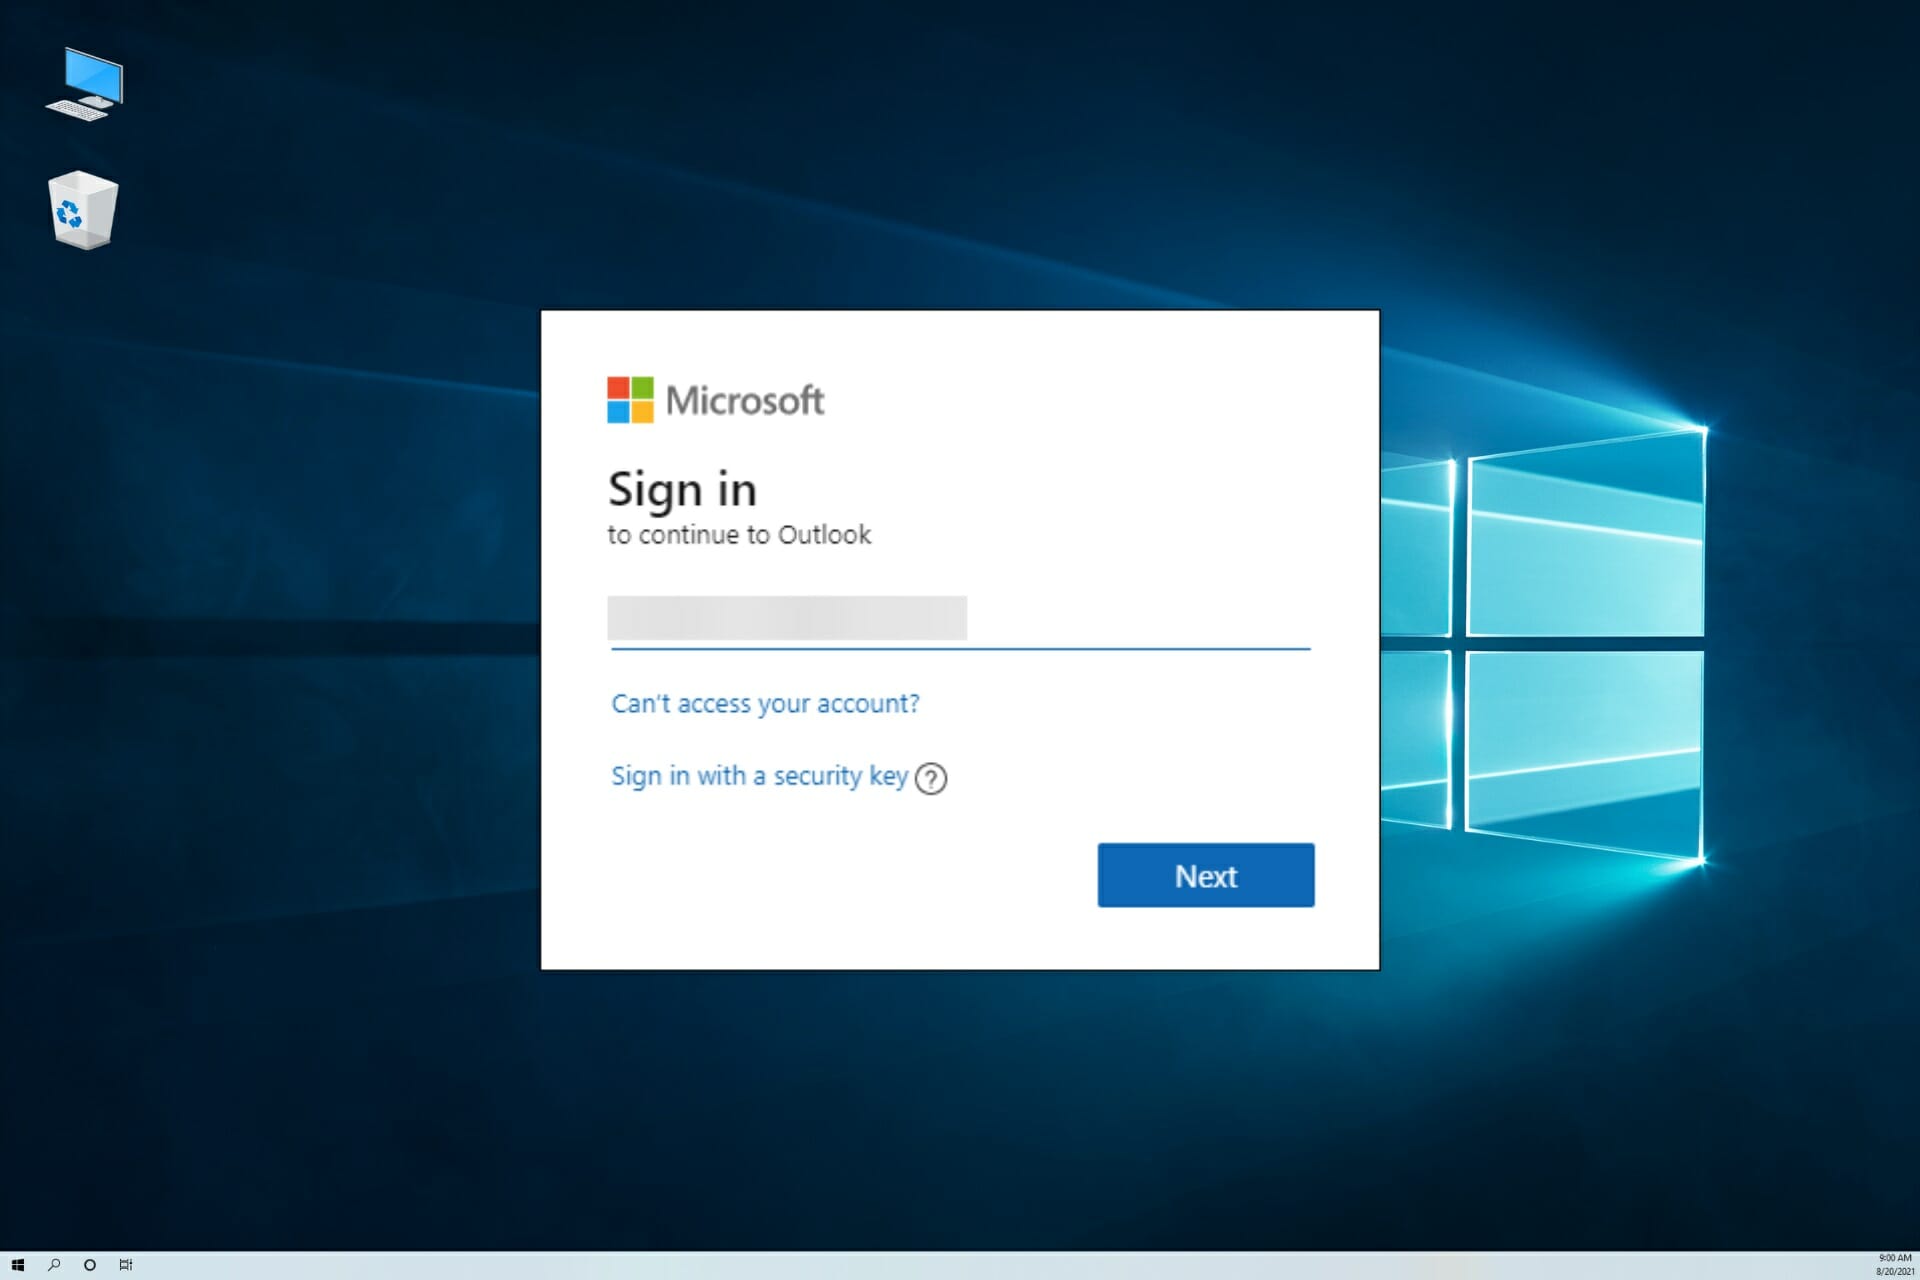 Fix Outlook sign-in bugs